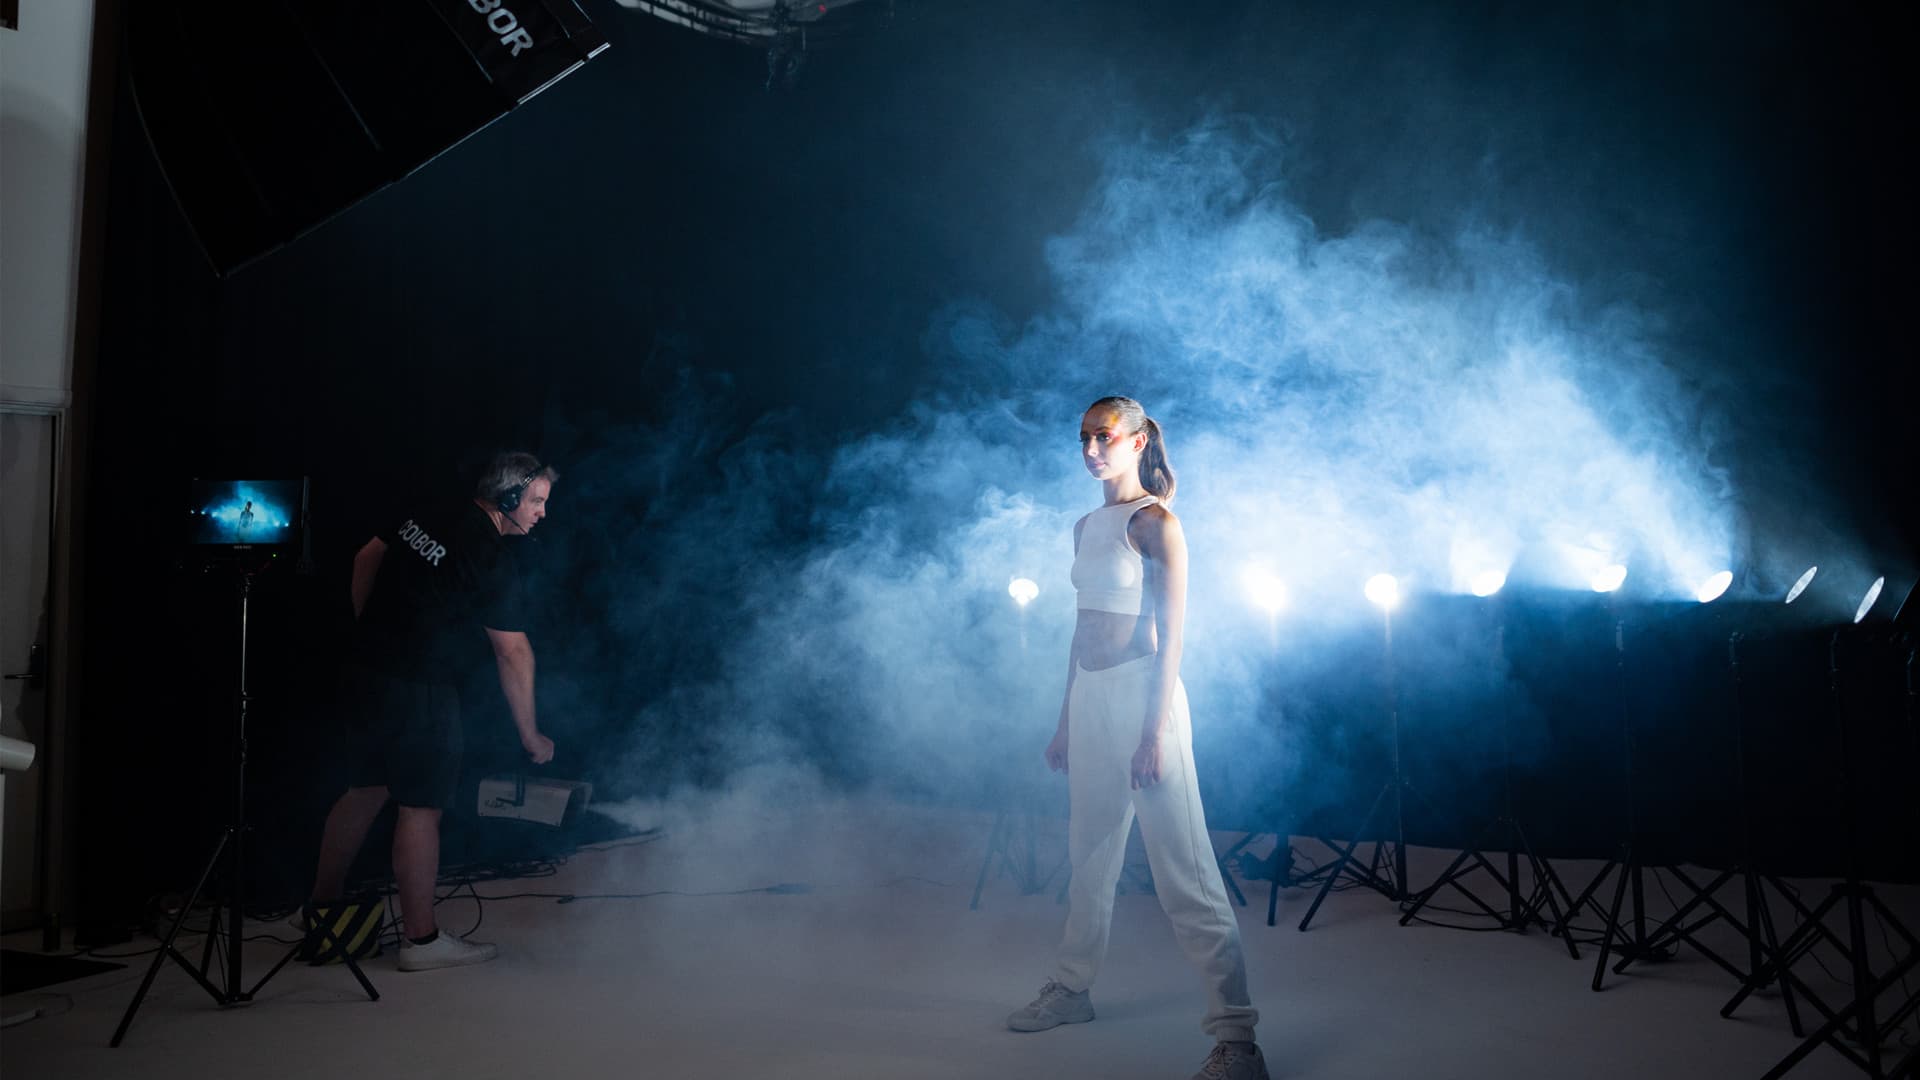 How to set up lighting for dance video and photography?